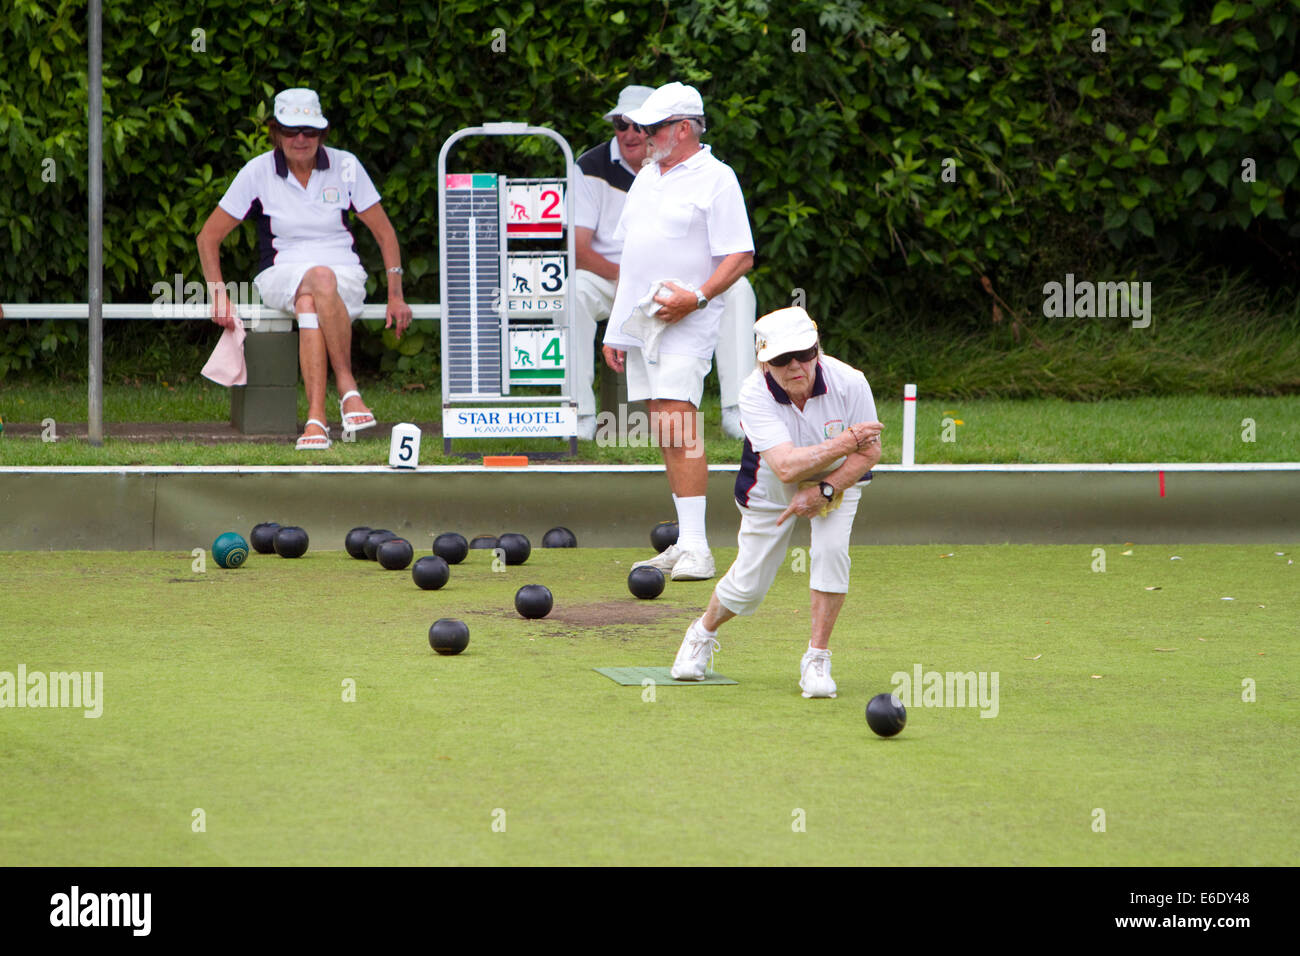 Lawn bowling at Waitangi in the Bay of Islands, North Island, New Zealand. Stock Photo